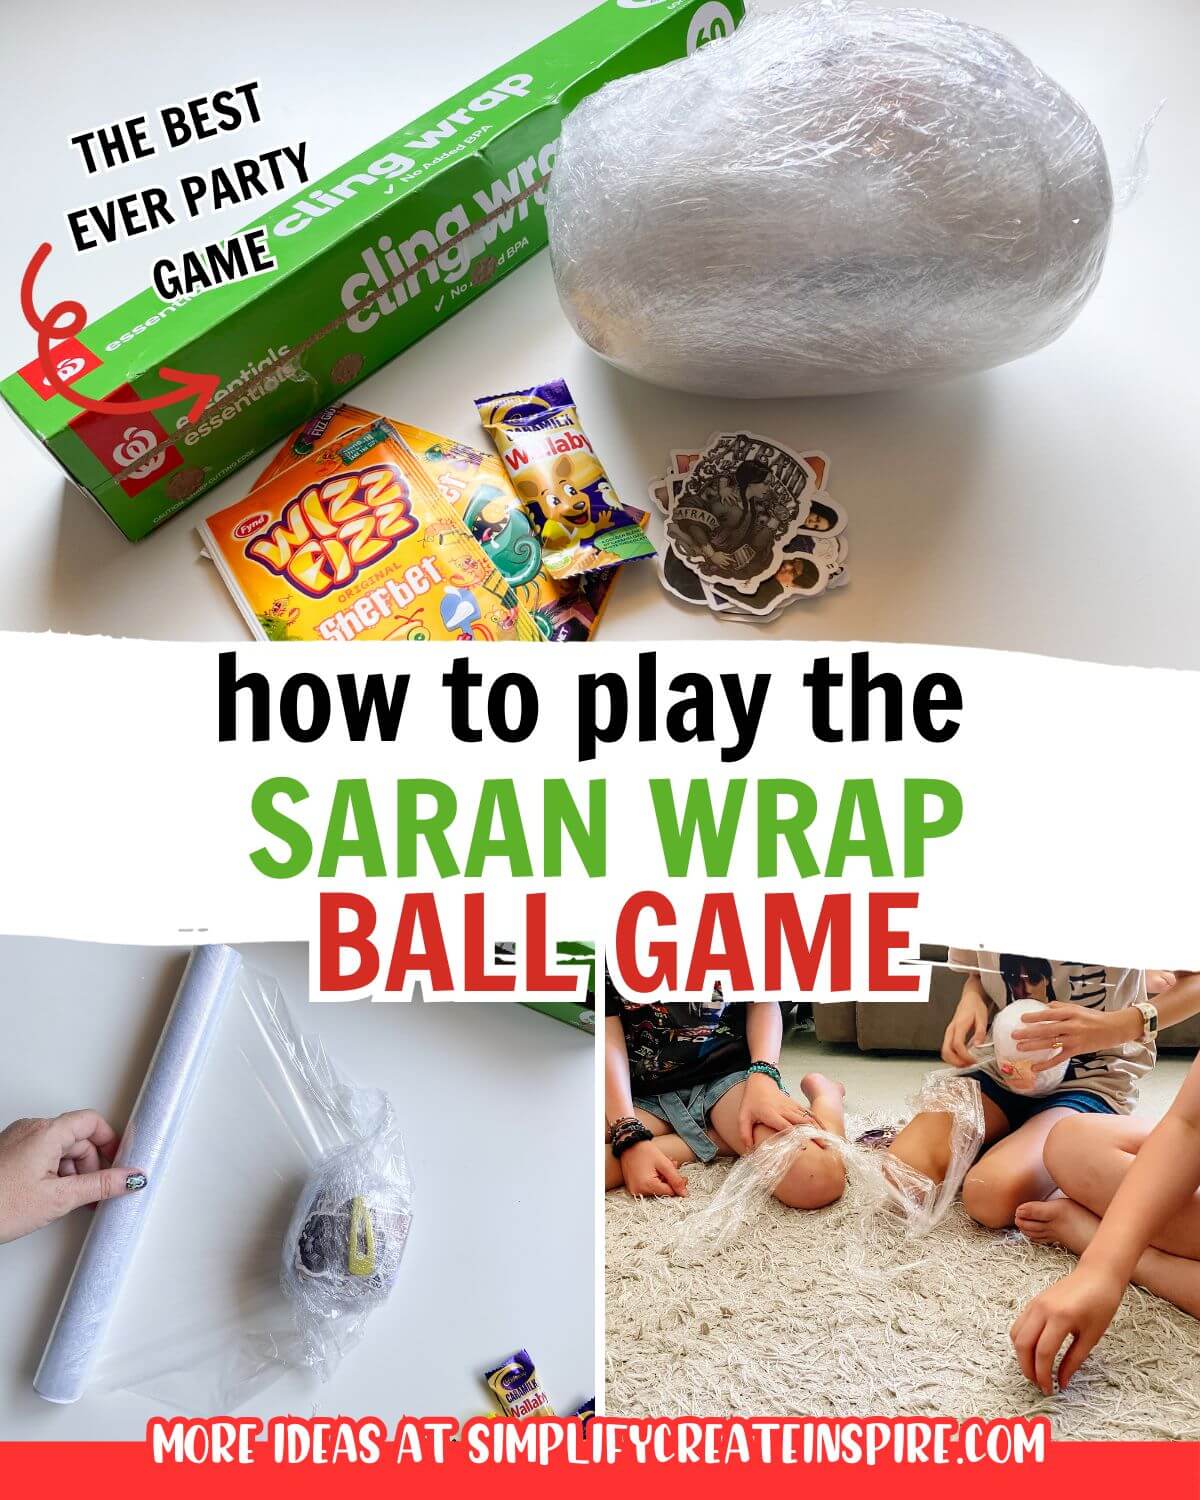 How to play the saran wrap ball game.